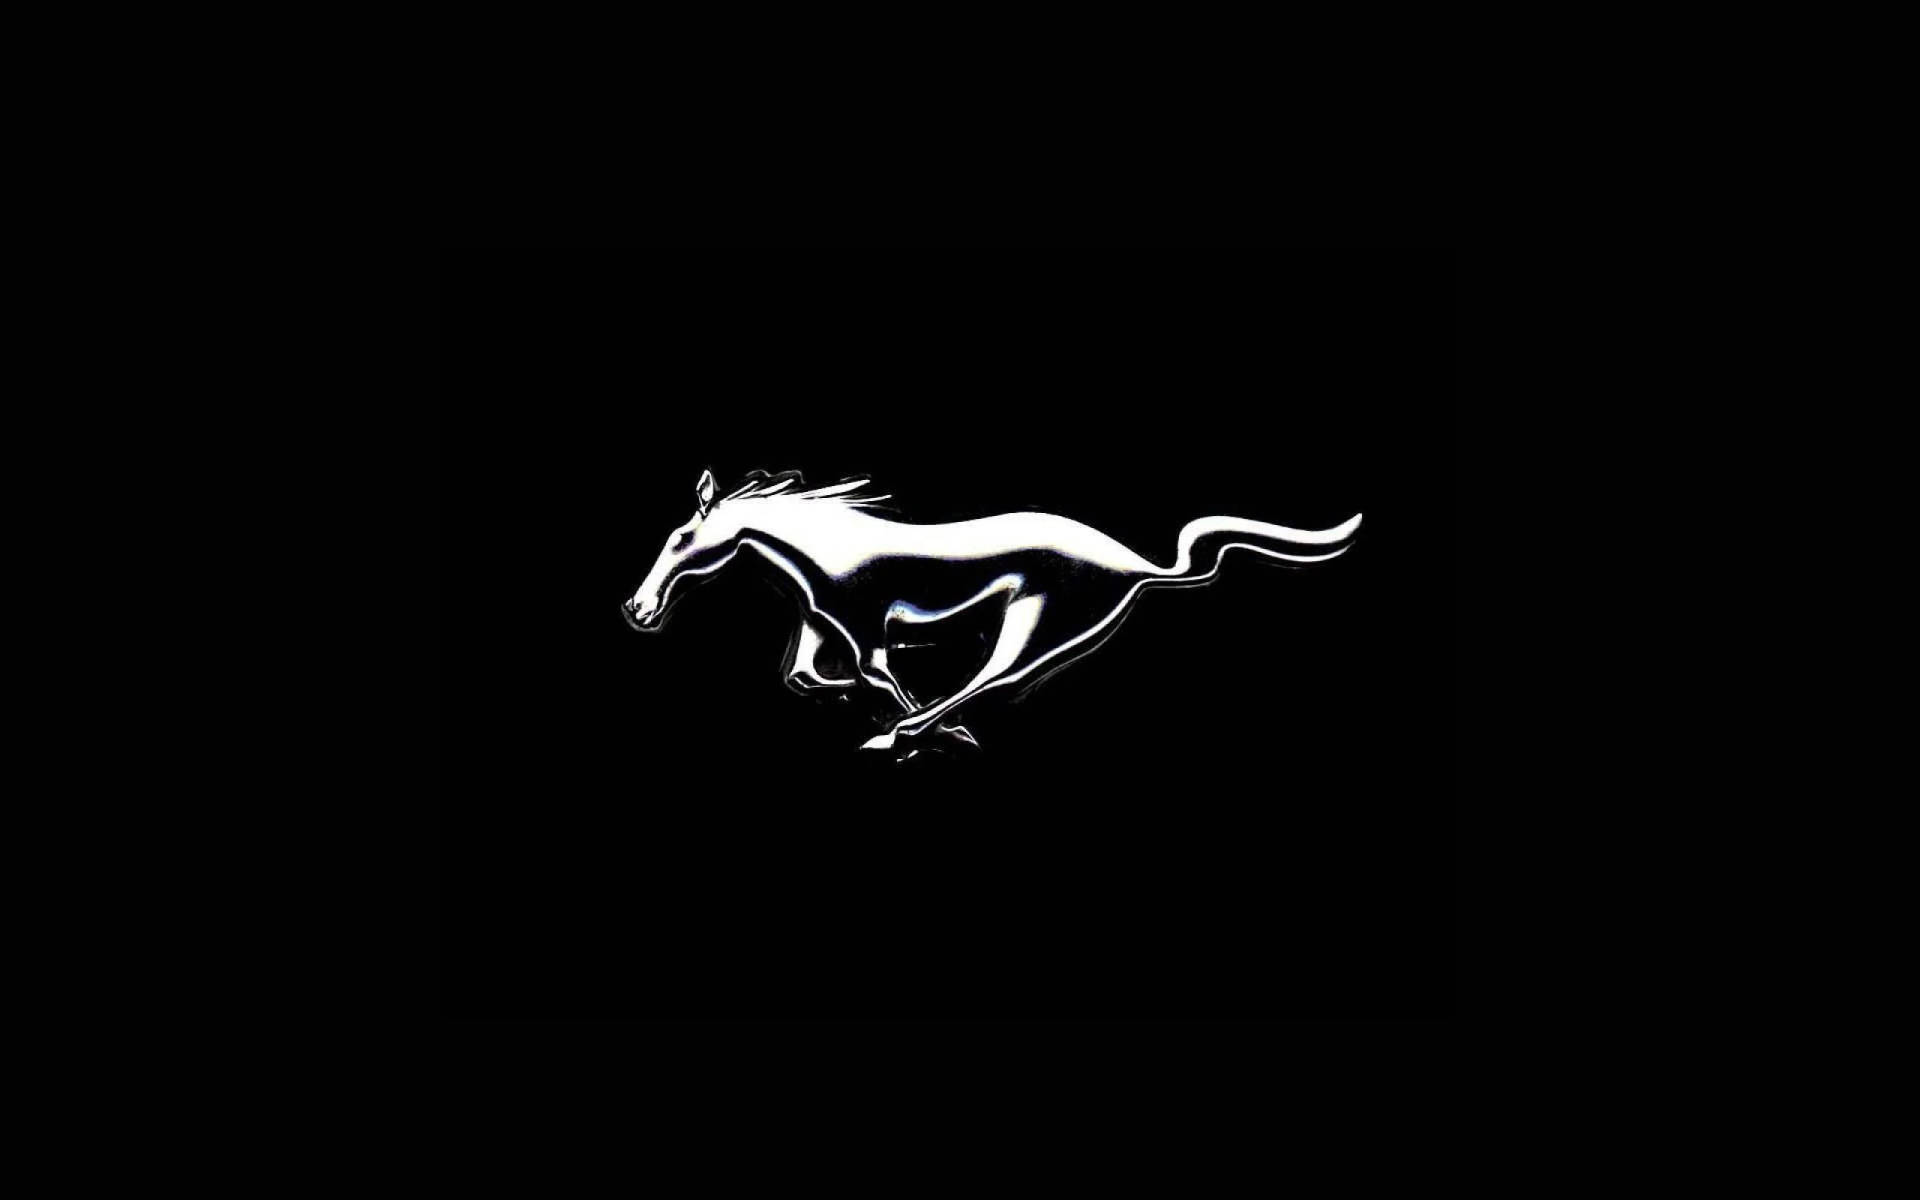 Silver Mustang Emblem In Solid Black Background